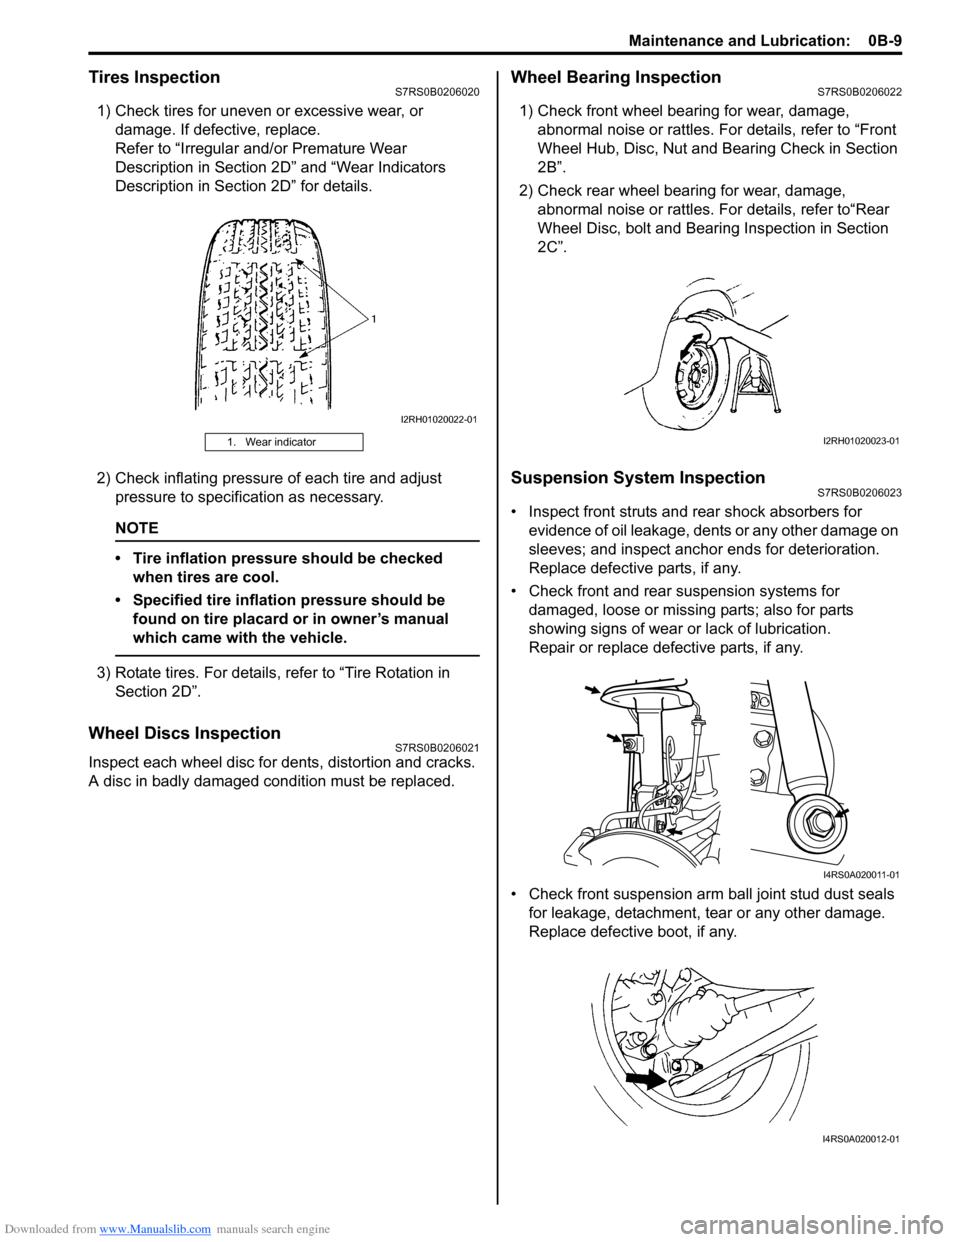 SUZUKI SWIFT 2006 2.G Service Workshop Manual Downloaded from www.Manualslib.com manuals search engine Maintenance and Lubrication:  0B-9
Tires InspectionS7RS0B0206020
1) Check tires for uneven or excessive wear, or damage. If defective, replace.